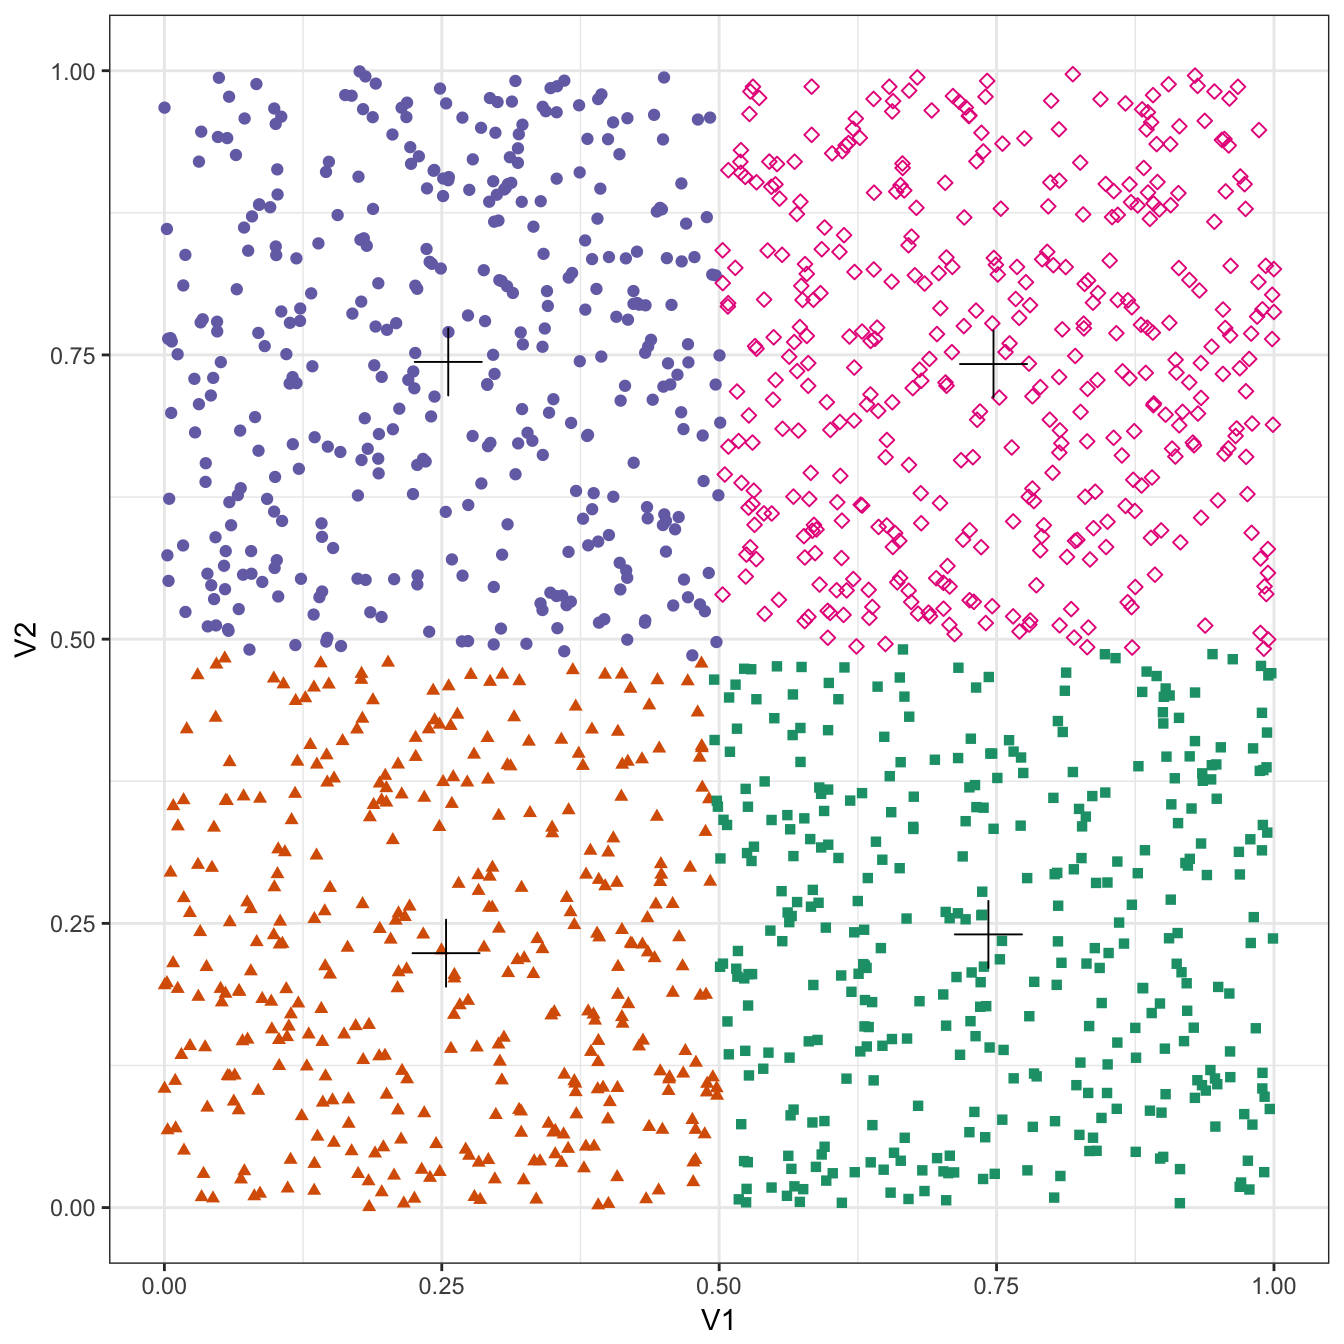 K-means clustering of the data set with no structure: scatterplot of clusters for k=4. Cluster centres indicated with a cross.